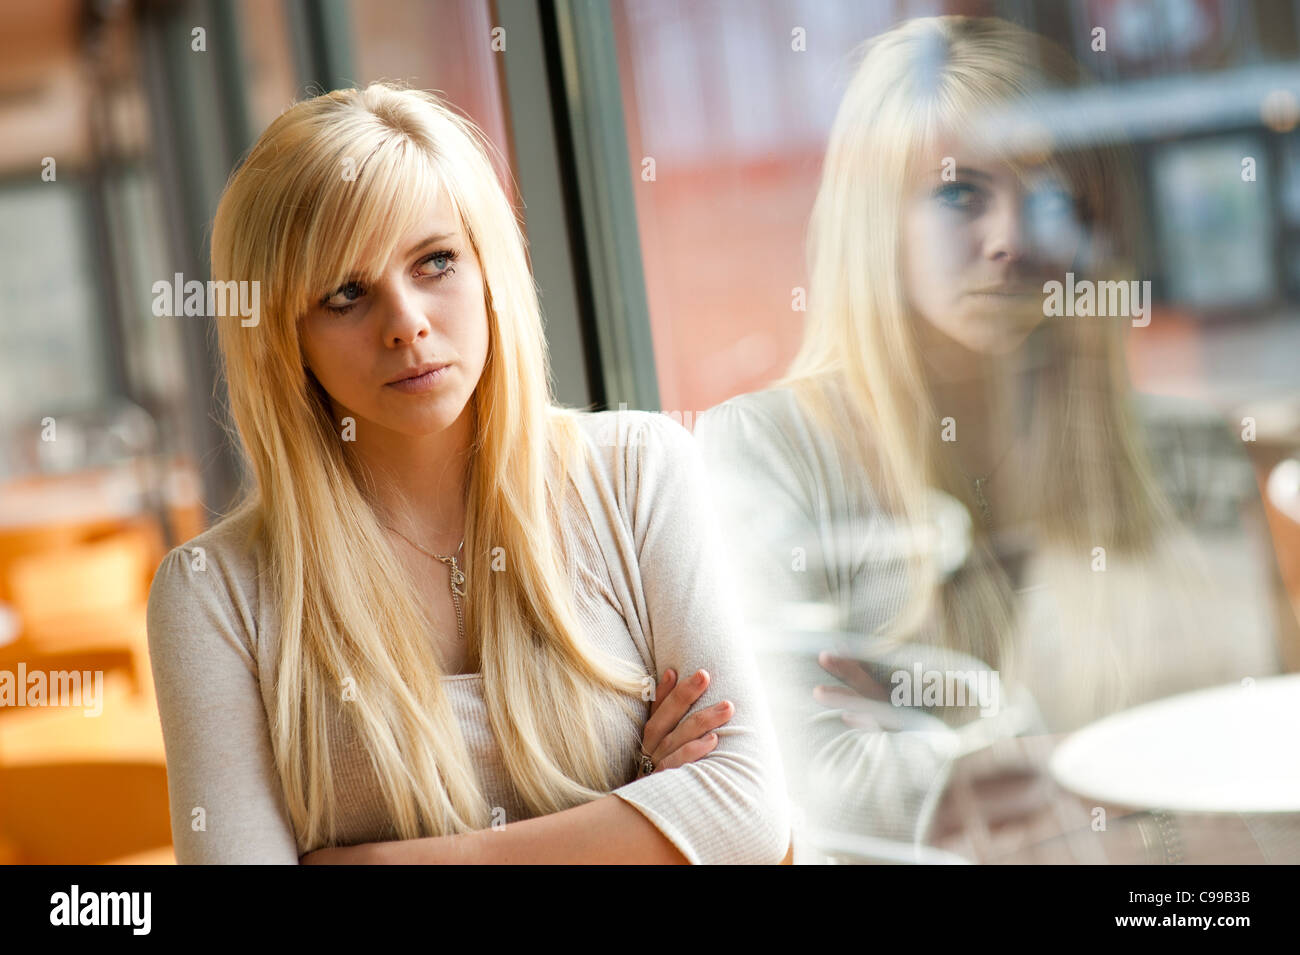 A 16 year old blonde haired slim teenage girl, UK Stock Photo